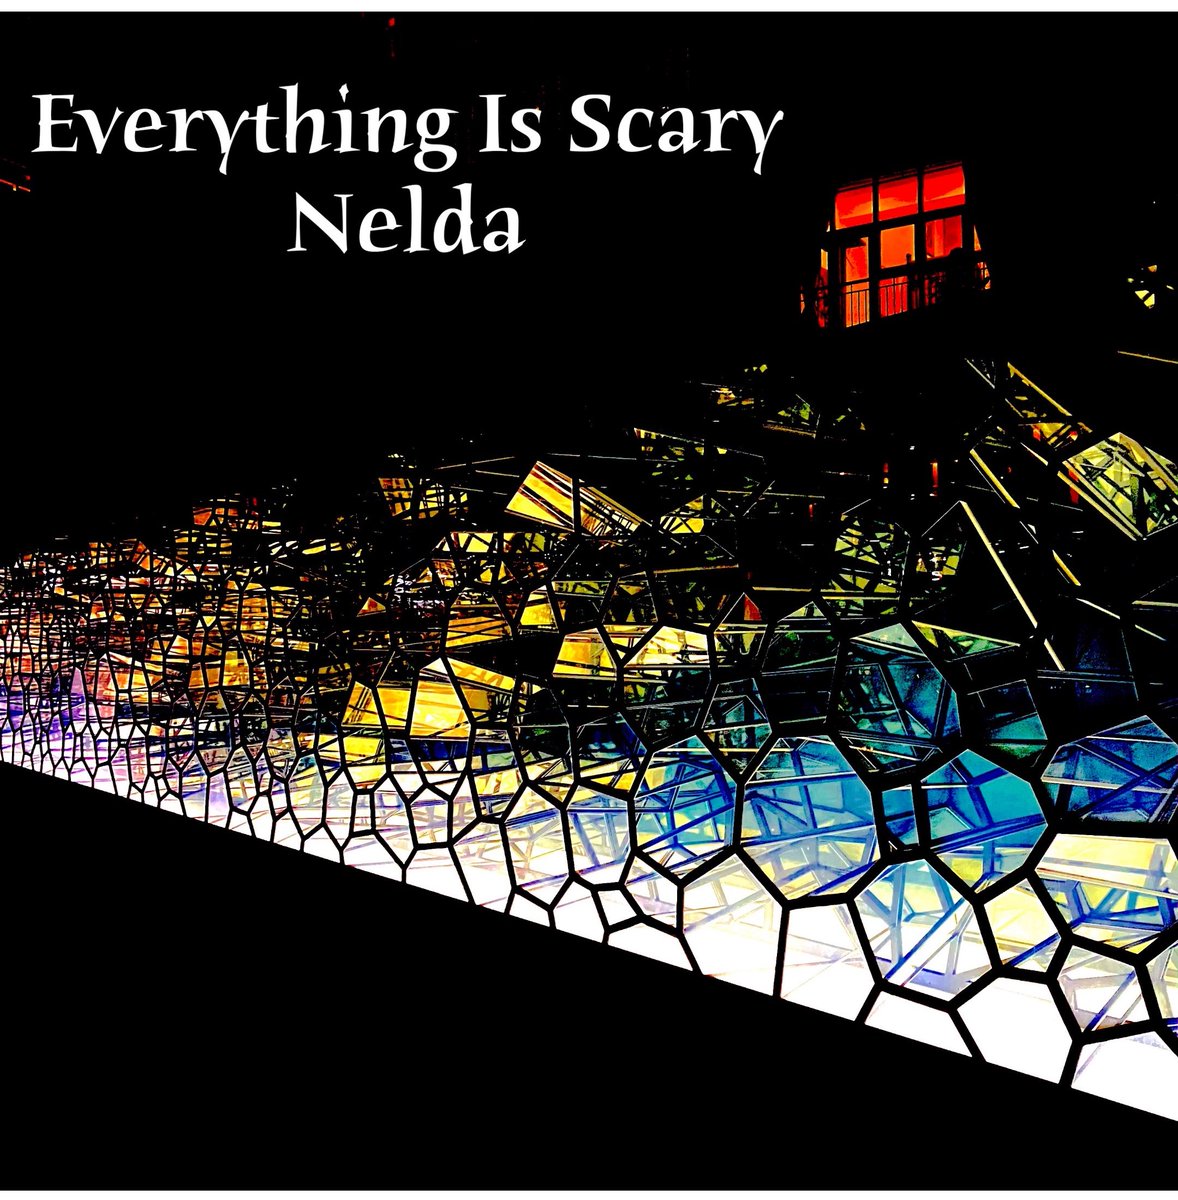 Listen to the single 'Everything Is Scary' and enjoy an awesome new song from the promising Nelda. #indiedockmusicblog #popjazz indiedockmusicblog.co.uk/?p=23875